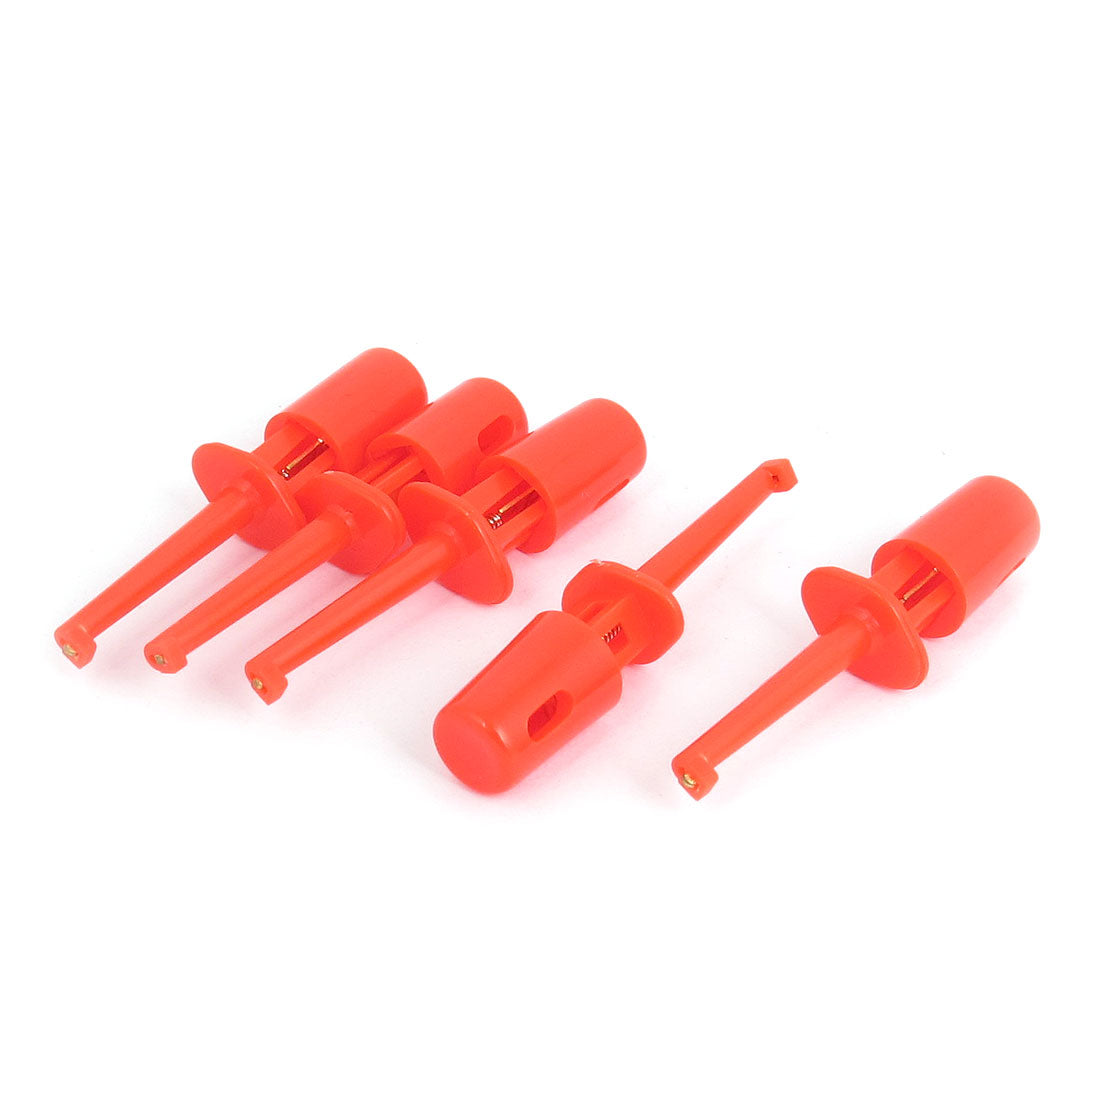 uxcell Uxcell 5pcs Electrical Probe Testing Lead Wire Hook Clip Kit Red